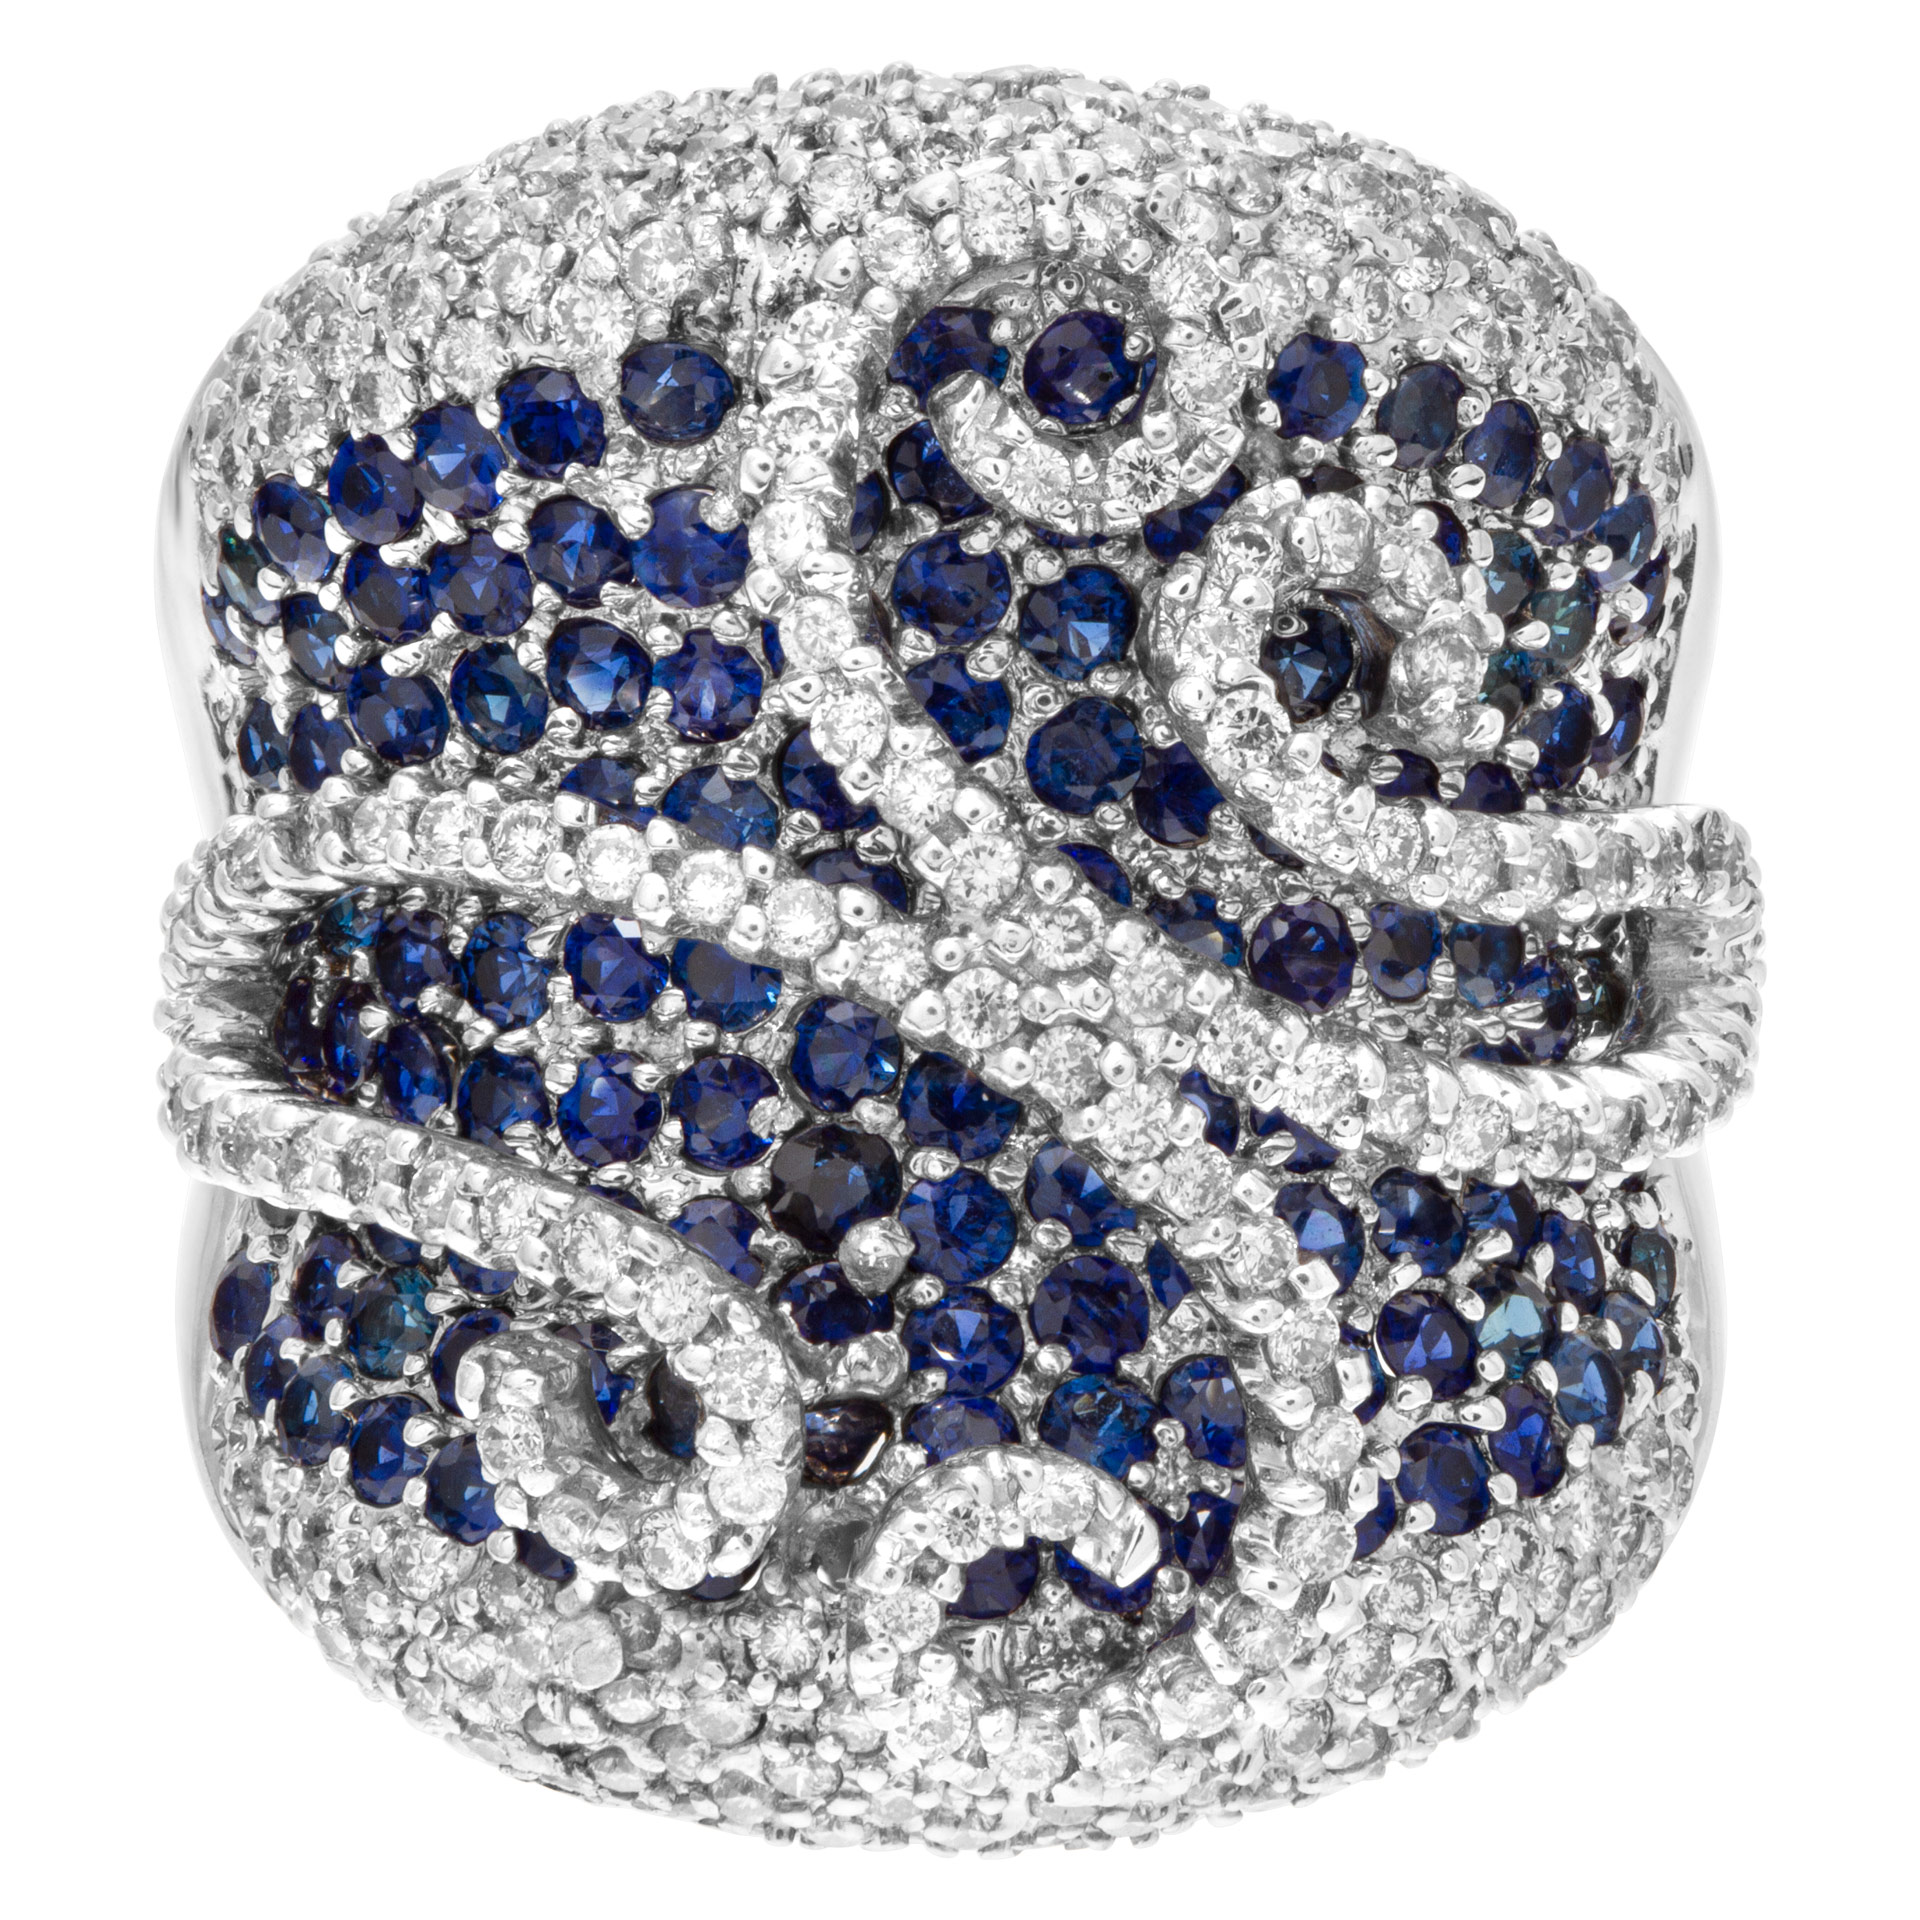 Wide pave diamonds & pave sapphire ring set in 18K white gold. image 1